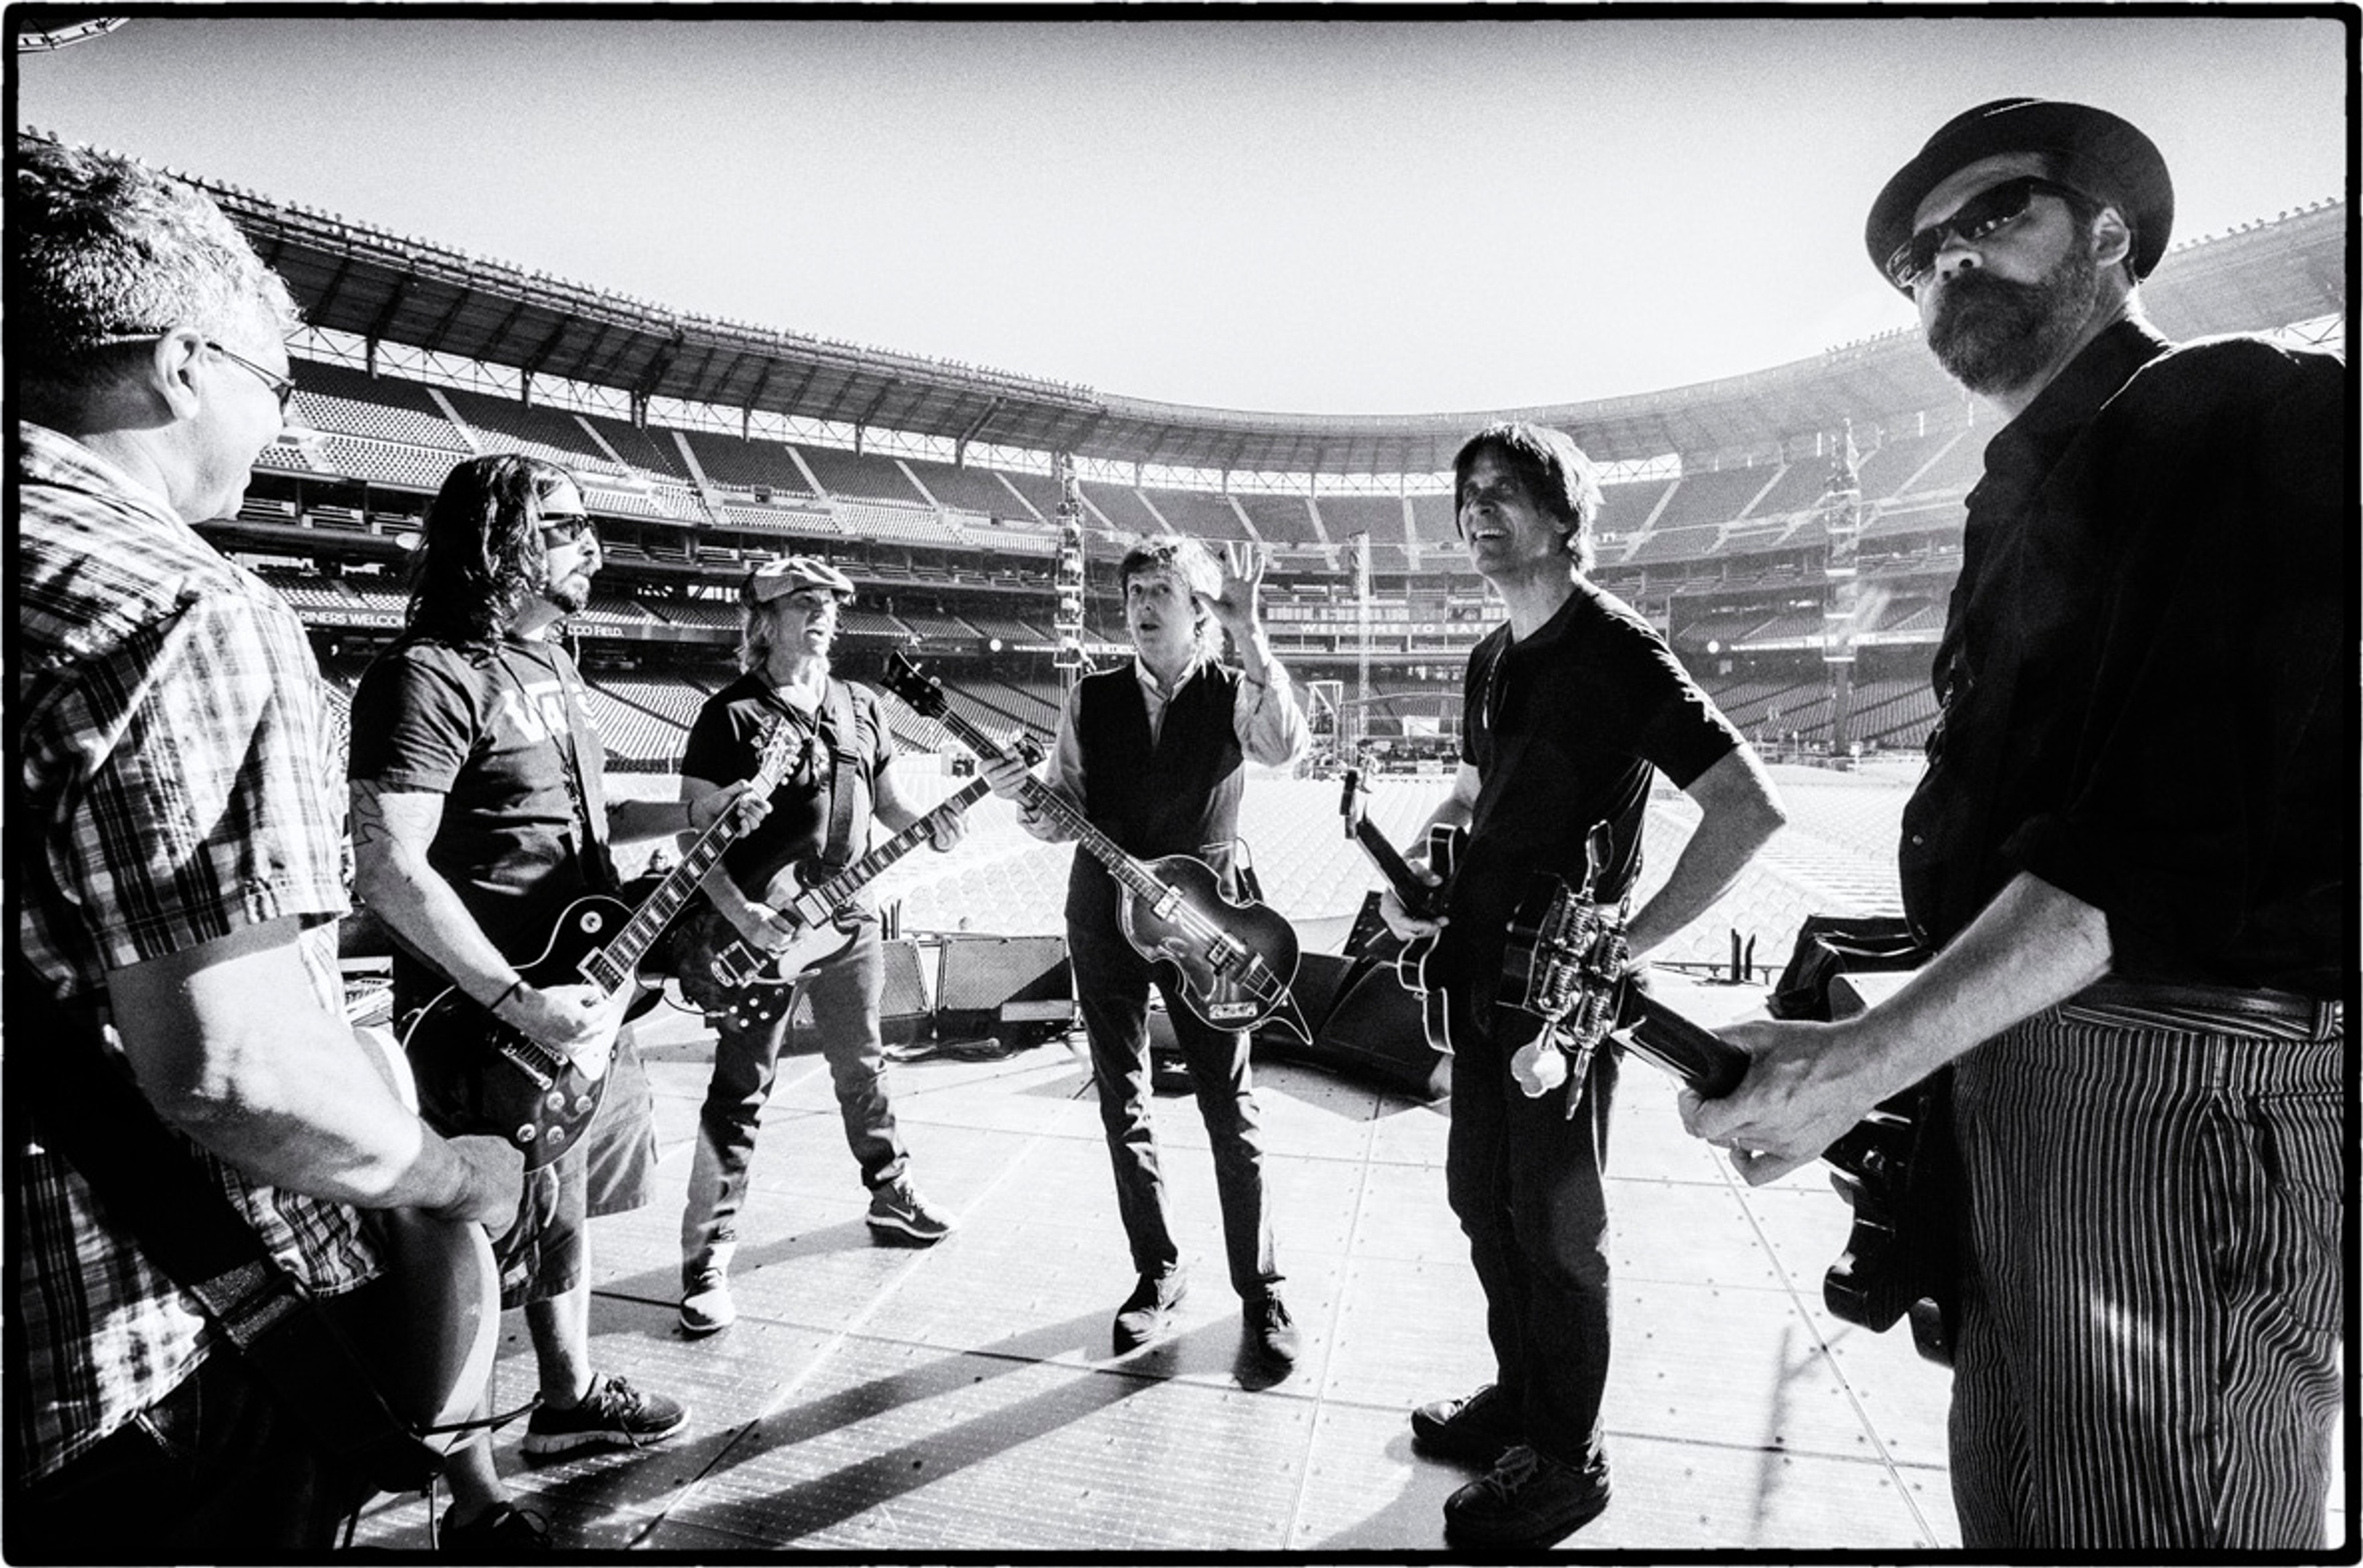 Pat Smear, Dave Grohl, Brian, Paul, Rusty and Krist Novoselic, Safeco Field, Seattle, 19th July 2013